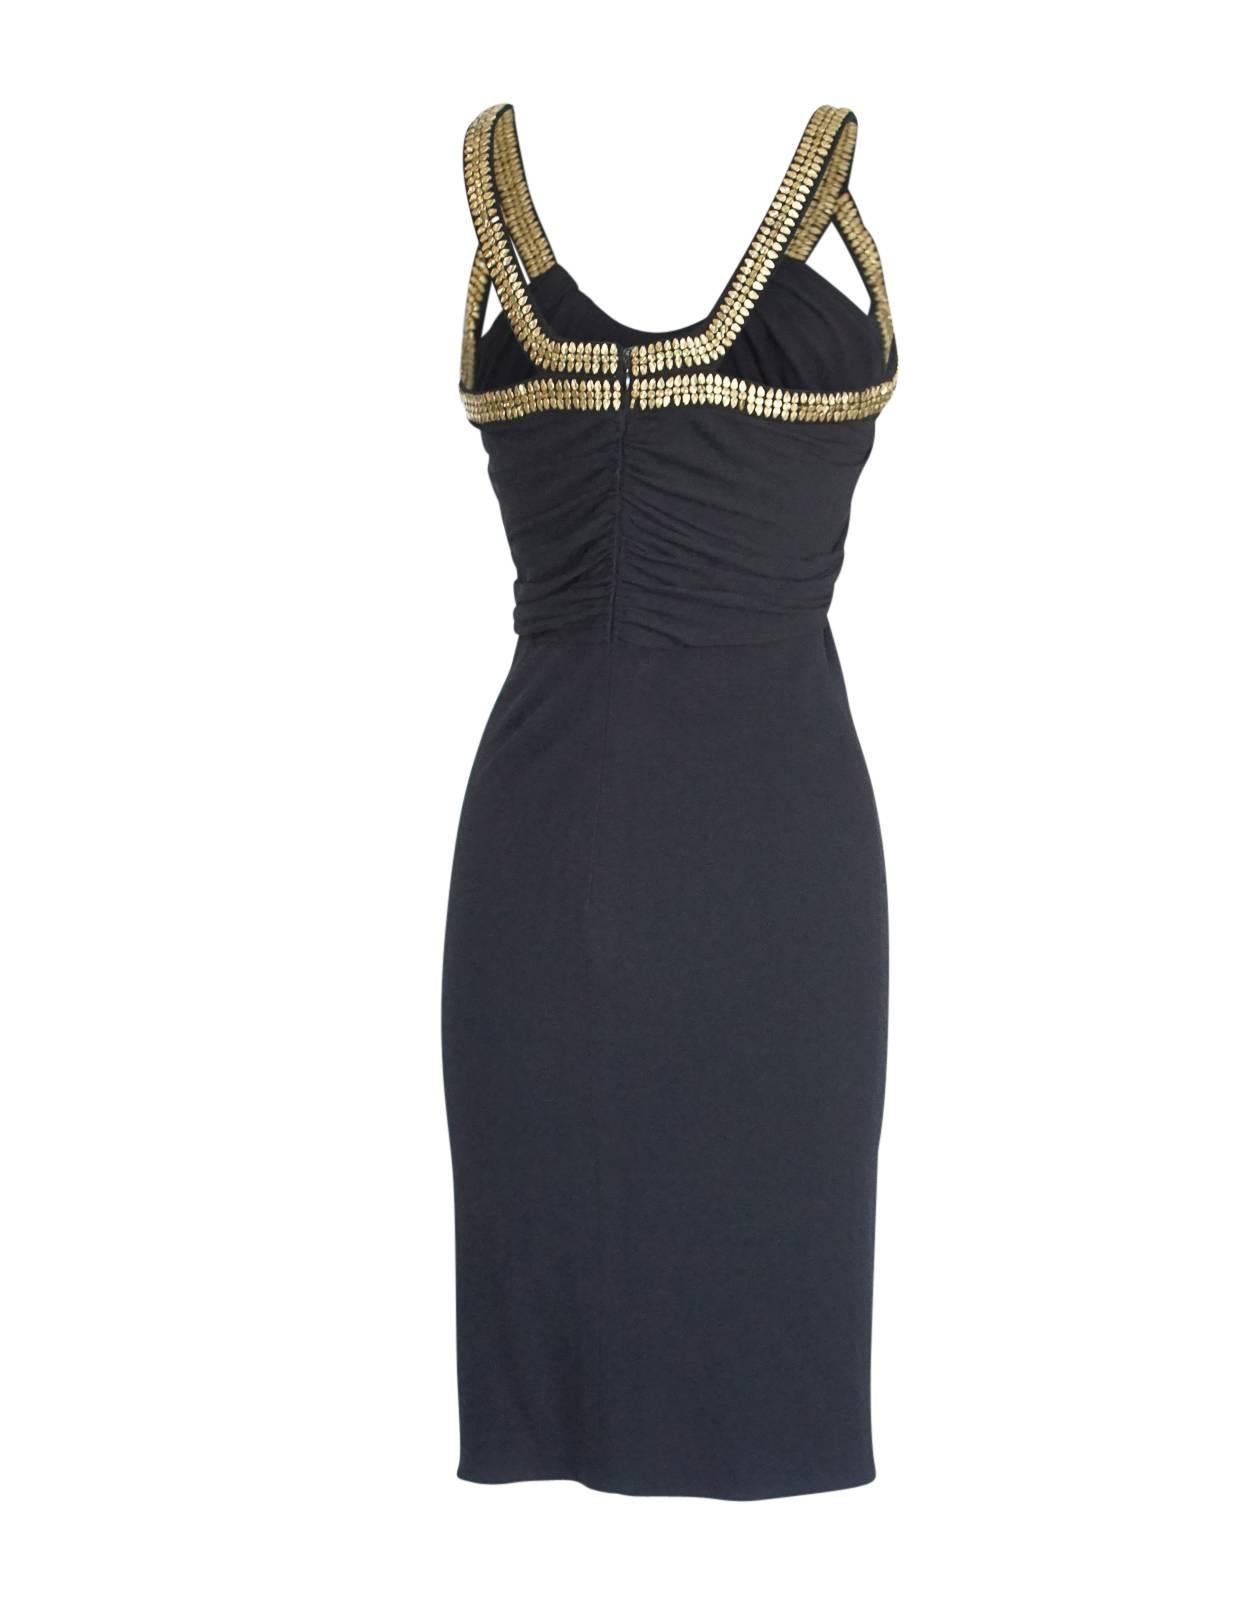 Versace Dress Gold Hardware Black pleated and Rouched 40 / 4 at 1stDibs